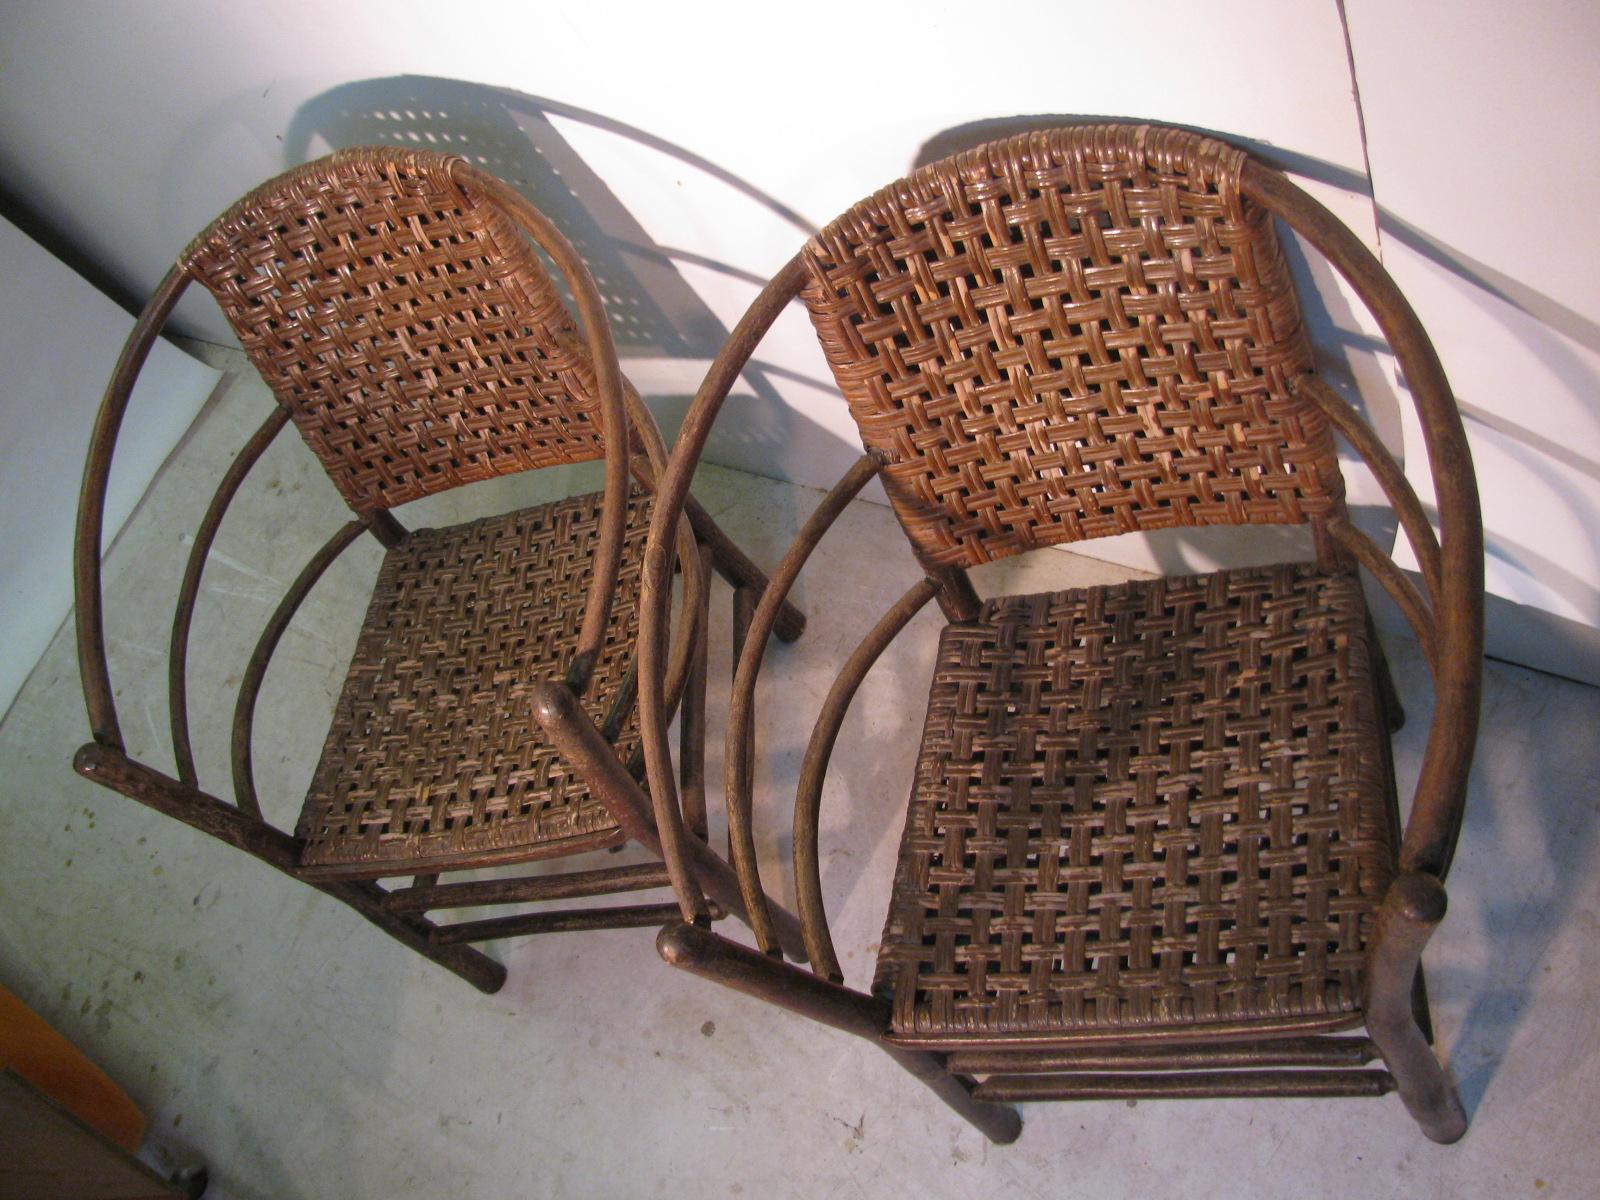 Fantastic pair of barrel back Old Hickory ash splint lounge chairs. Both chairs are stamped as pictured Old Hickory Martinsville Indiana. Minor wear, mostly to finish, very sturdy with no breaks. Price is for the pair.